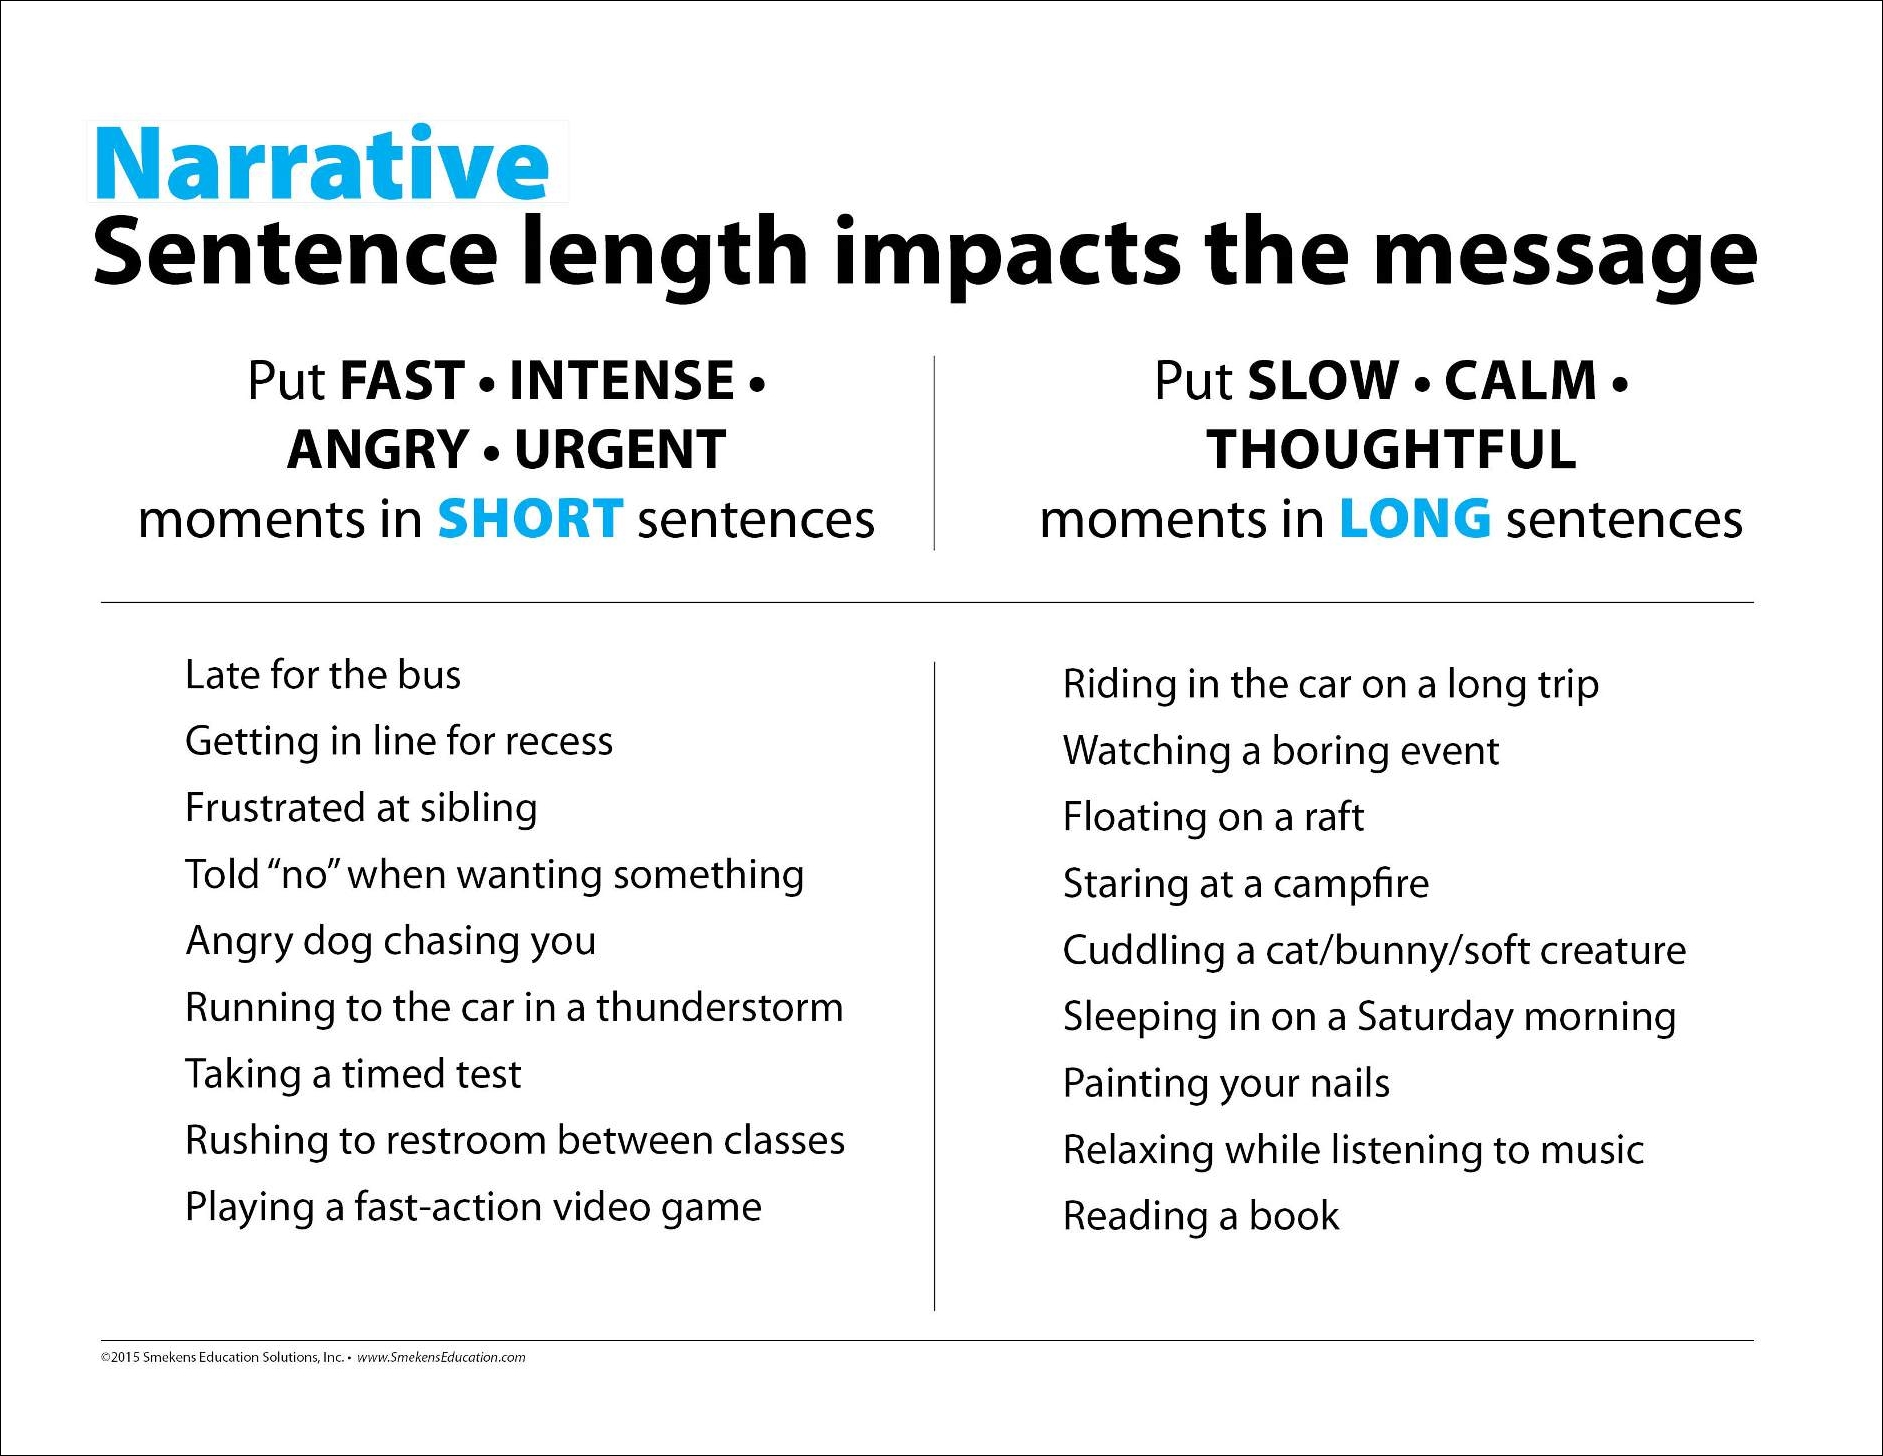 Narrative: Sentence Length Impacts Message - Examples